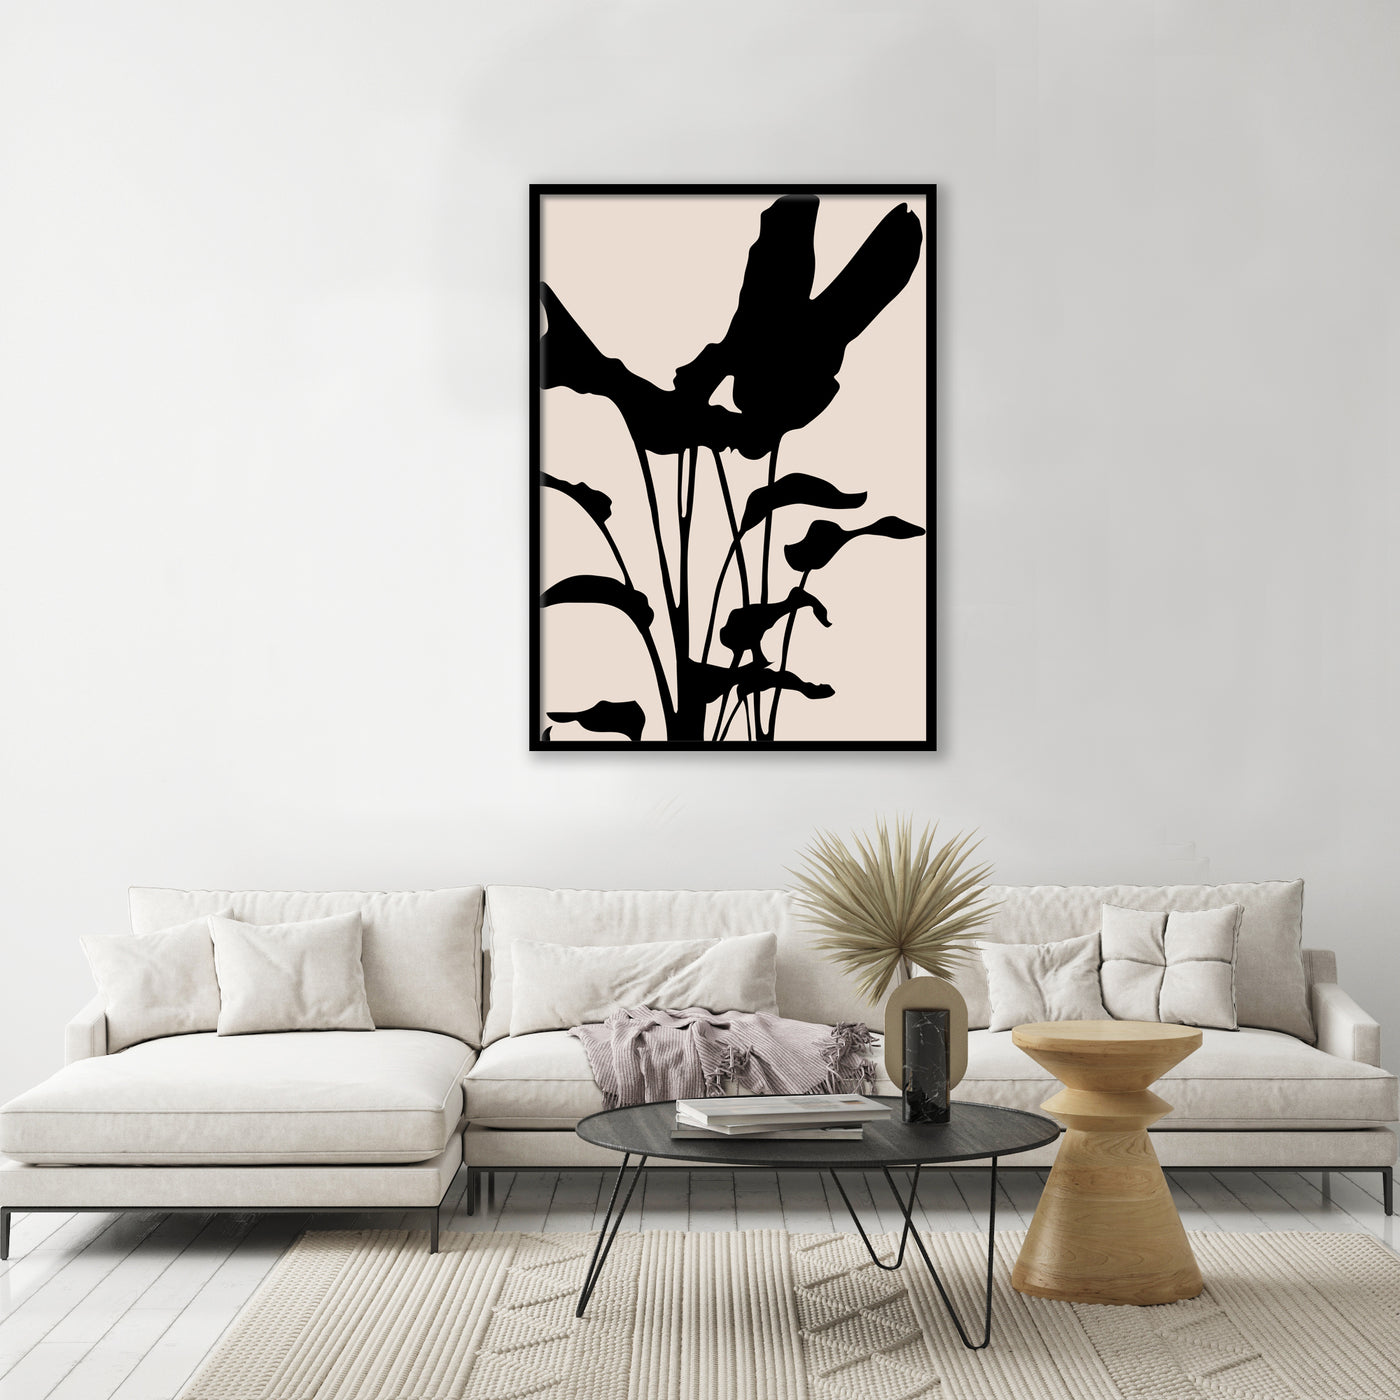 WALL ART | SHADOWY LEAVES PART 1